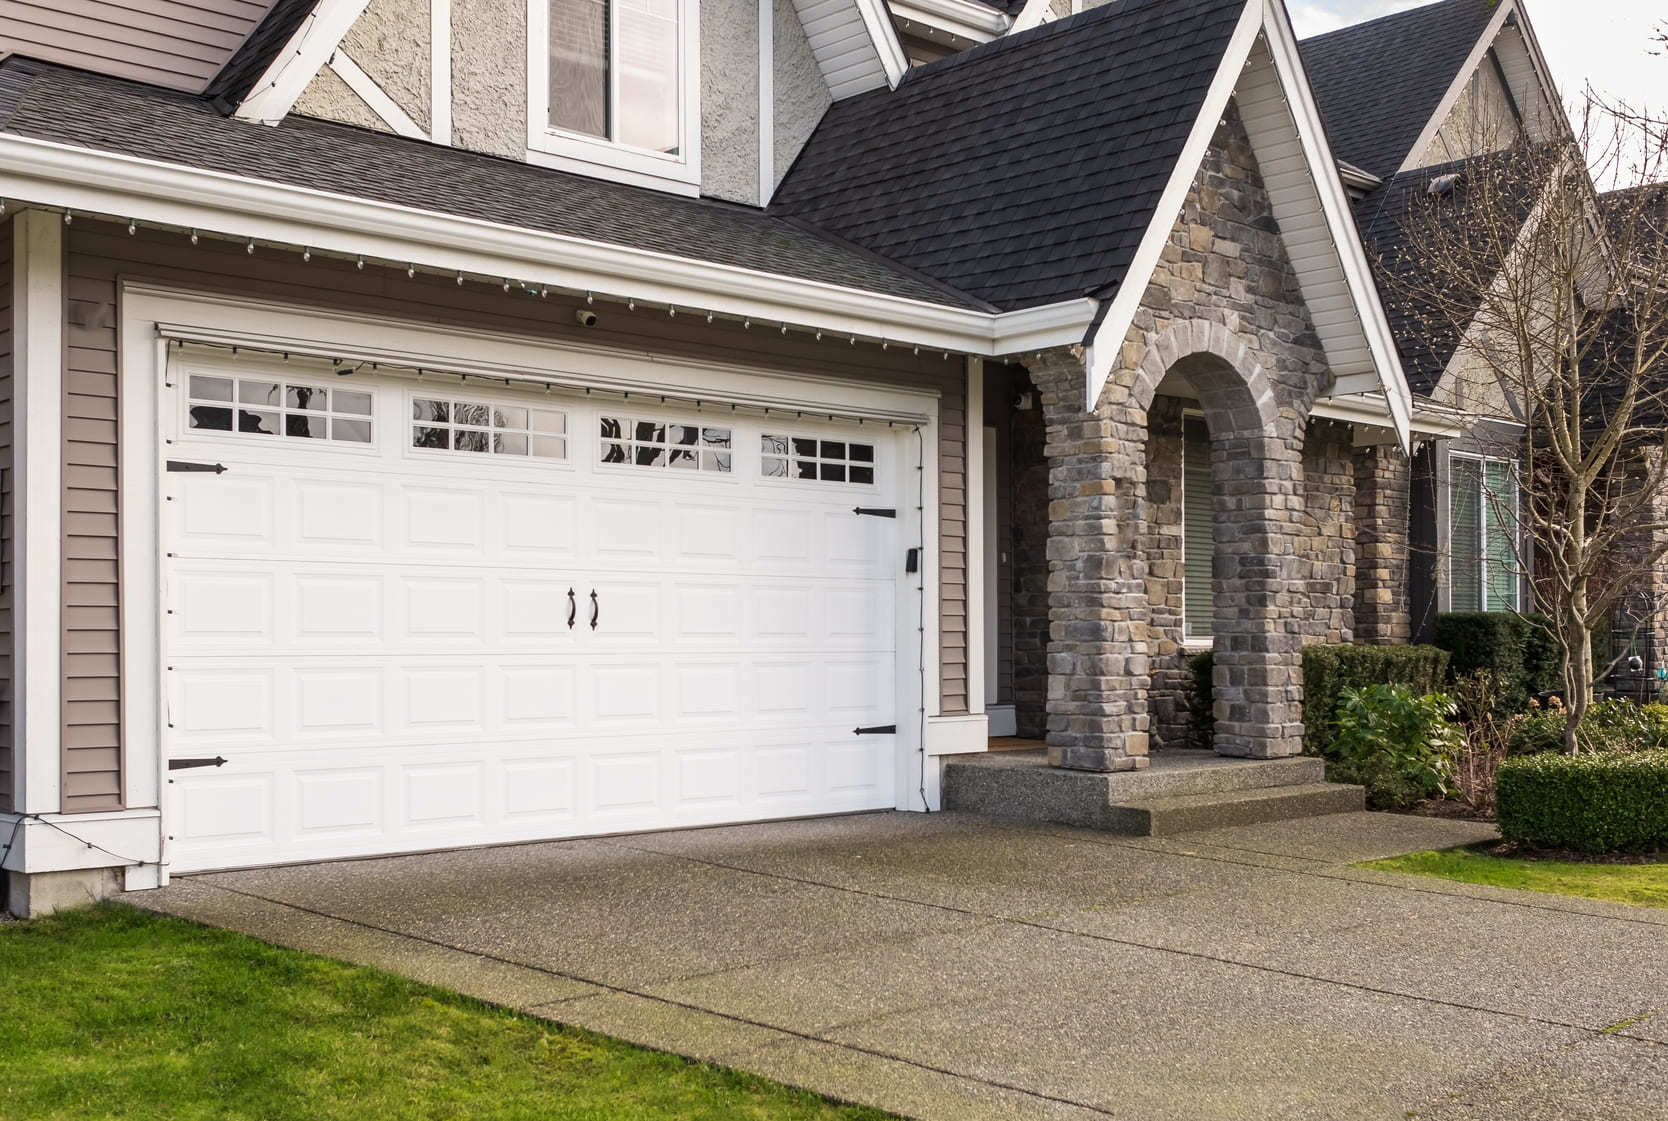 Beautiful stone home with a large white garage door